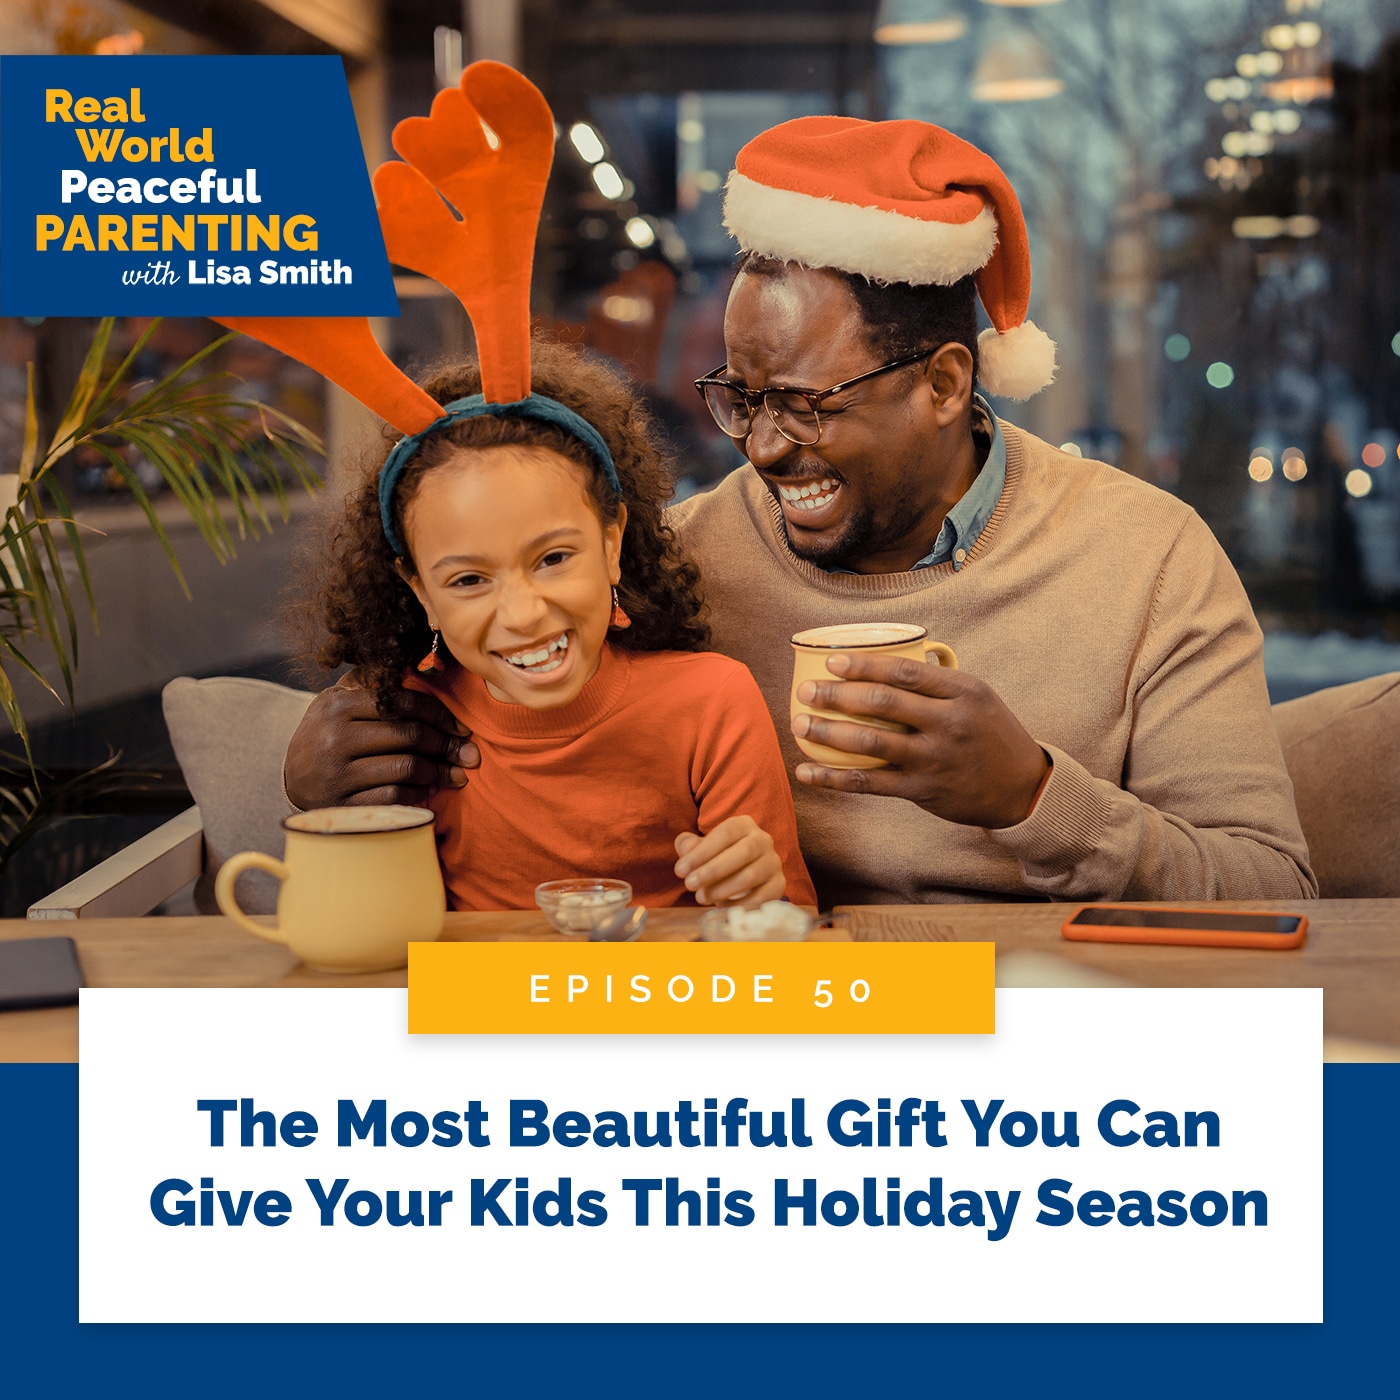 Real World Peaceful Parenting with Lisa Smith | The Most Beautiful Gift You Can Give Your Kids This Holiday Season